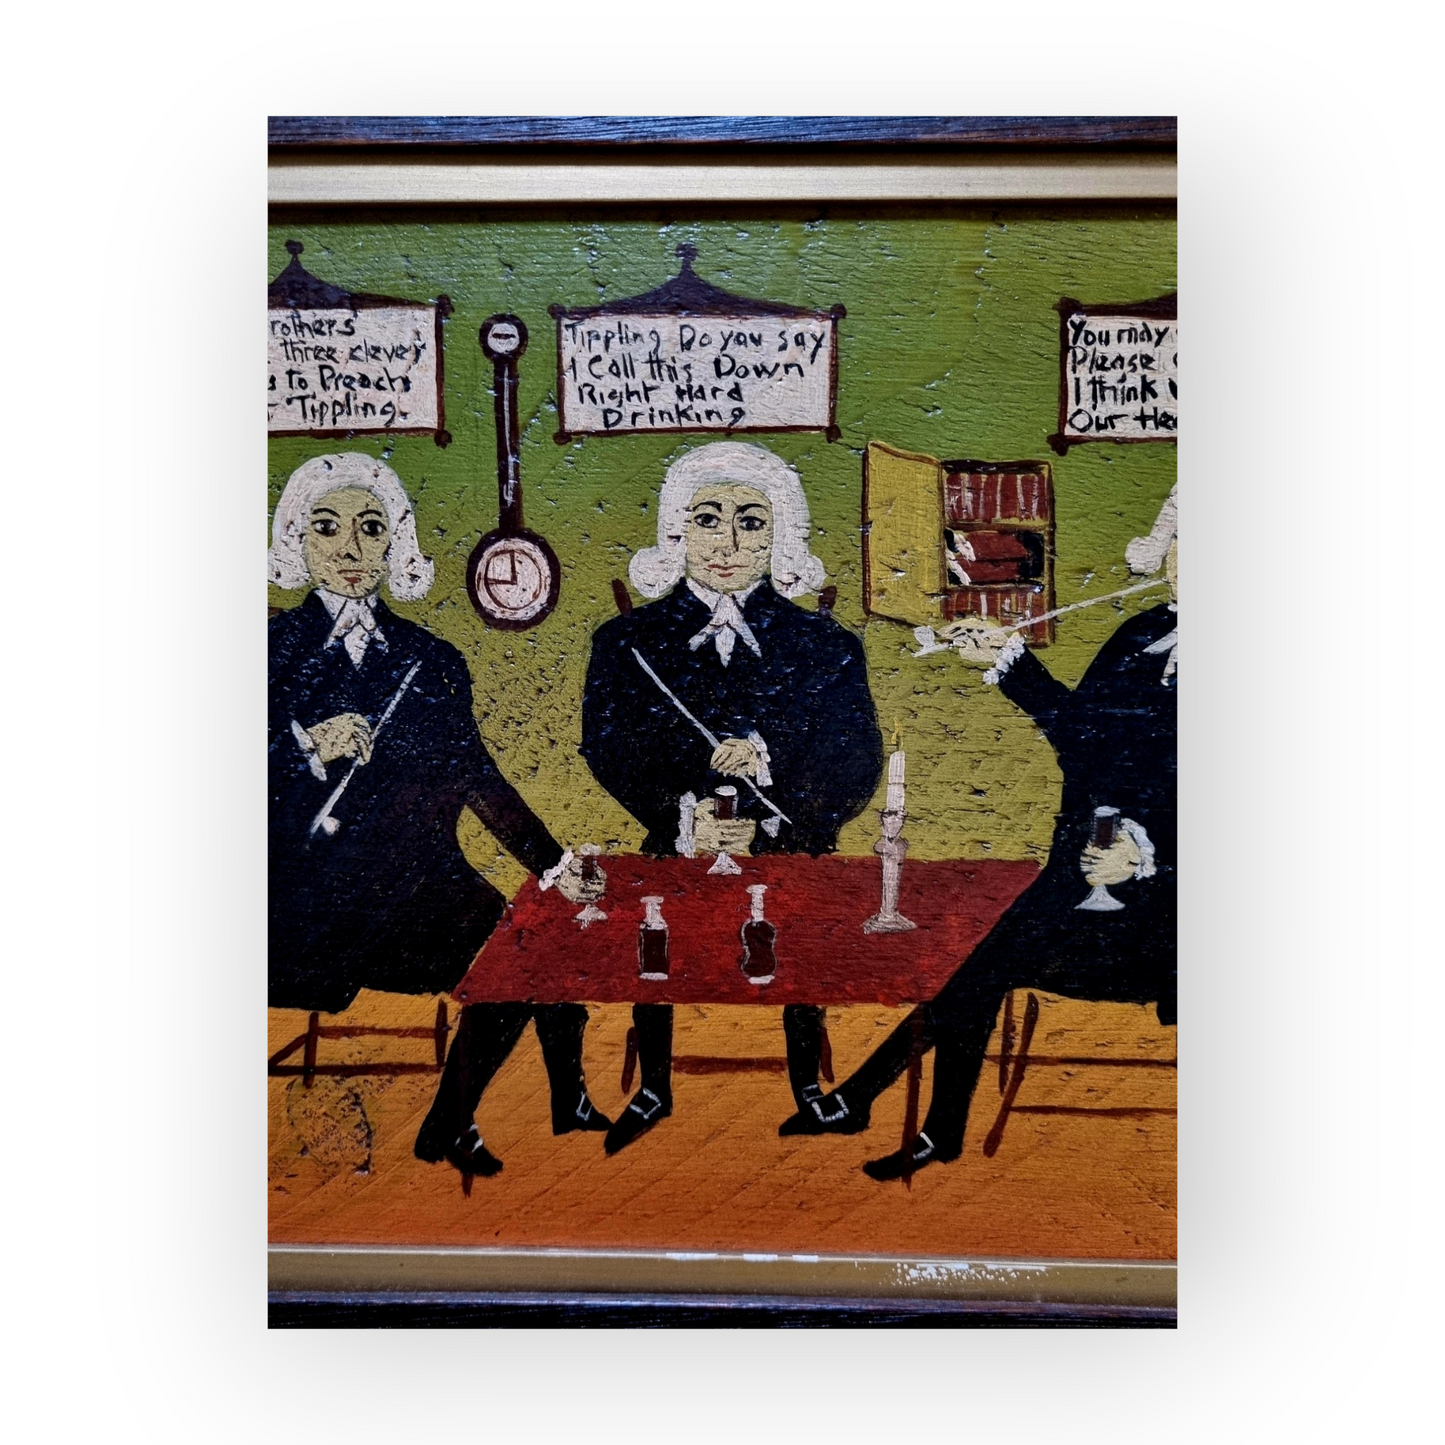 After The Original On Display at Compton Verney, A Naive 19th Century English School Antique Oil on Board Folk Art Painting Entitled "Three Sober Preachers"